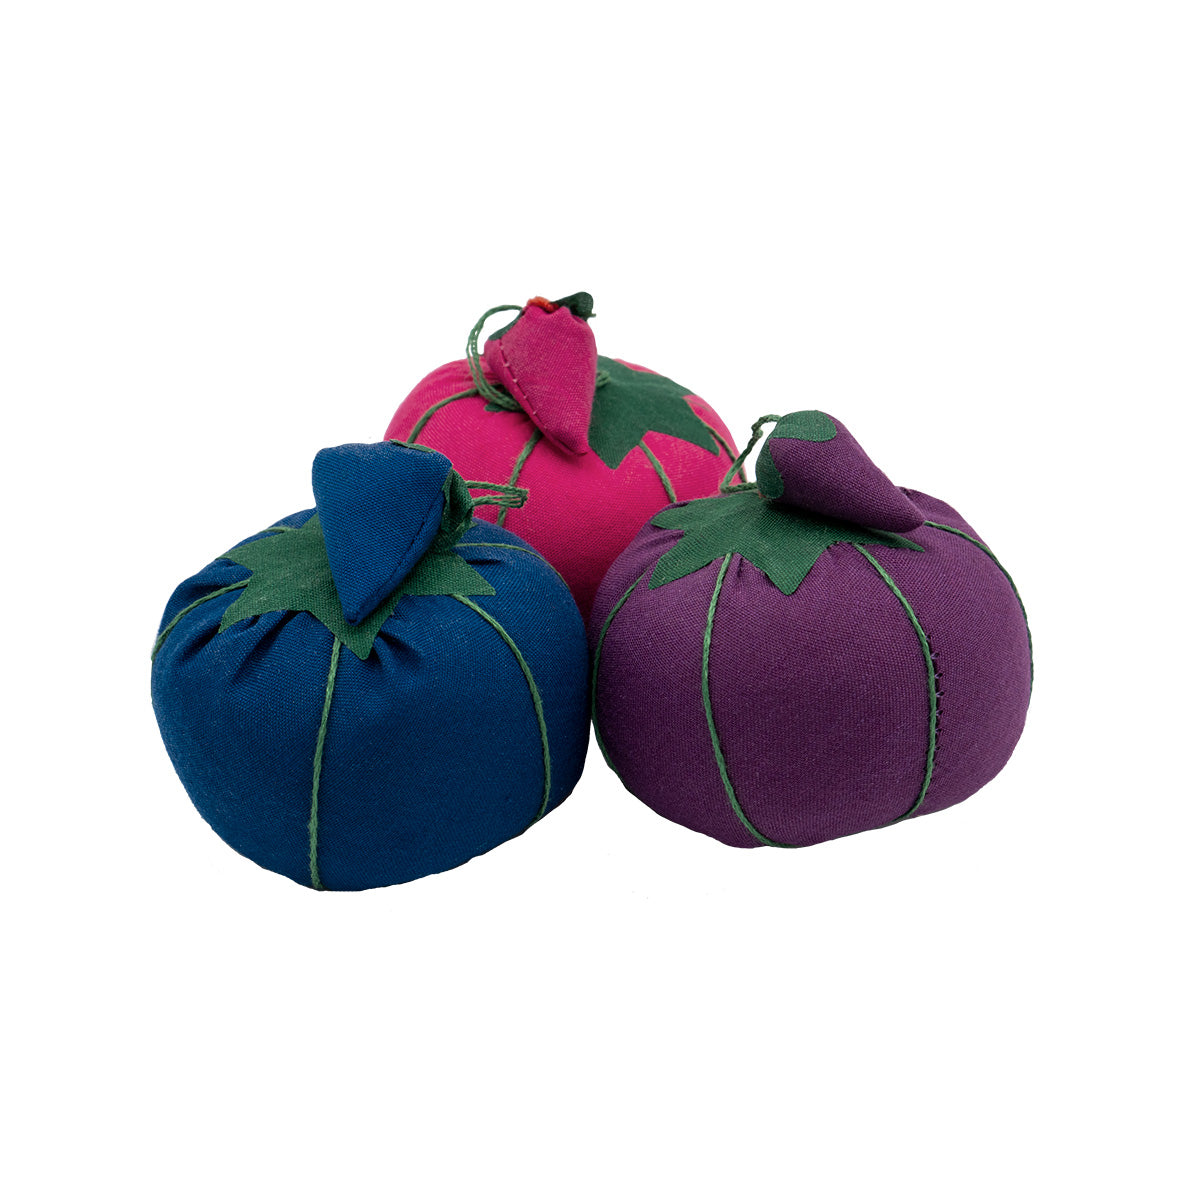 Three tomato-shaped pin cushions are arrayed in a triangle. The left cushion is blue, the top cushion is hot pink, and the right cushion is purple. All have a strawberry-shaped emery attached in the corresponding color.